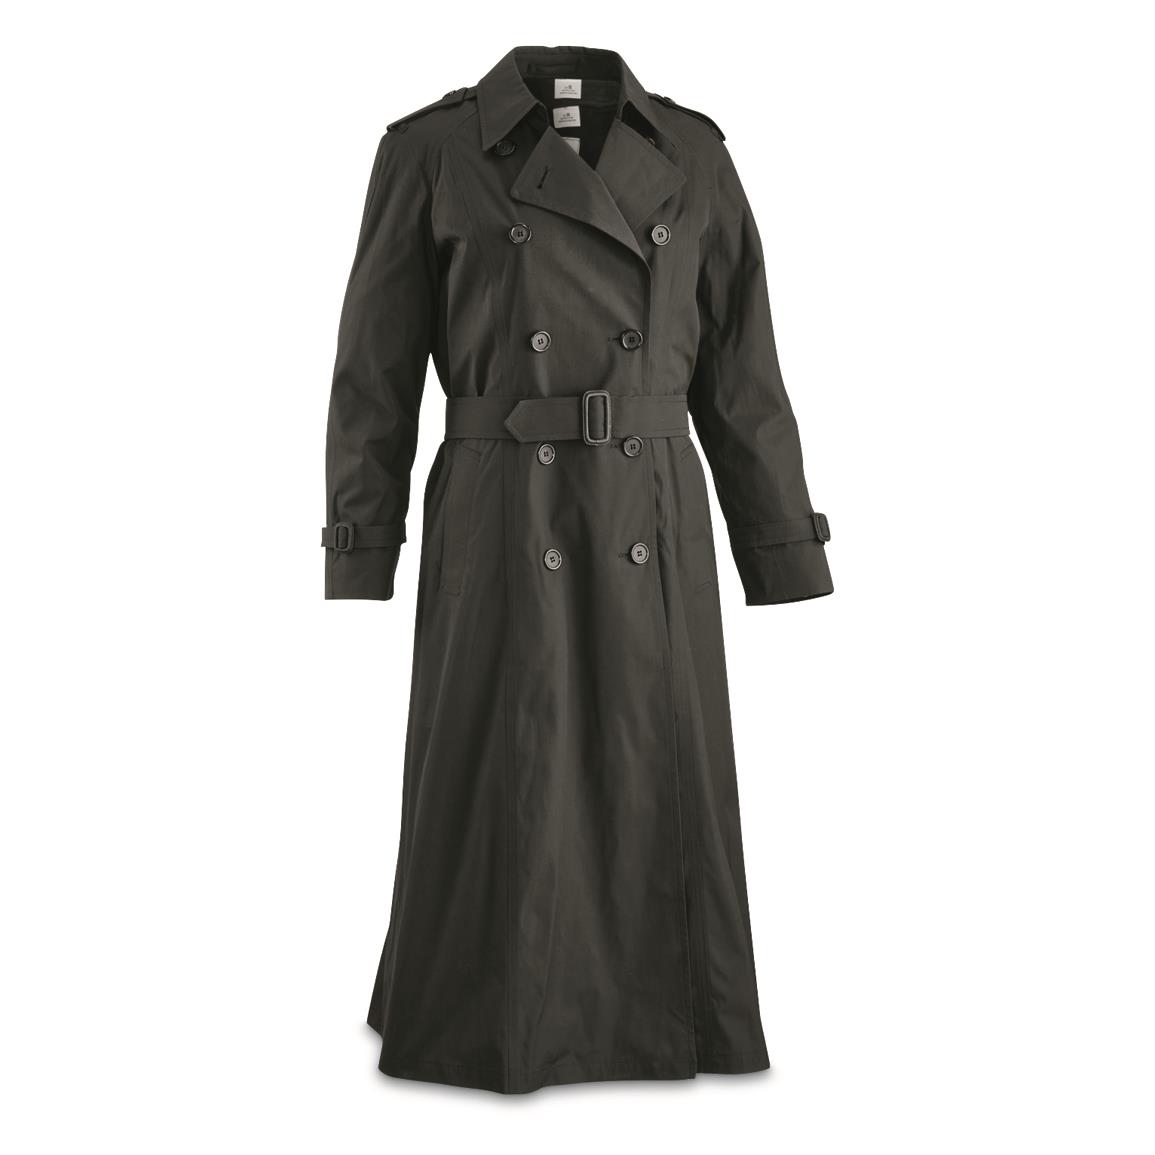 U.S. Army Surplus Womens All Weather Trench Coat, New, Black